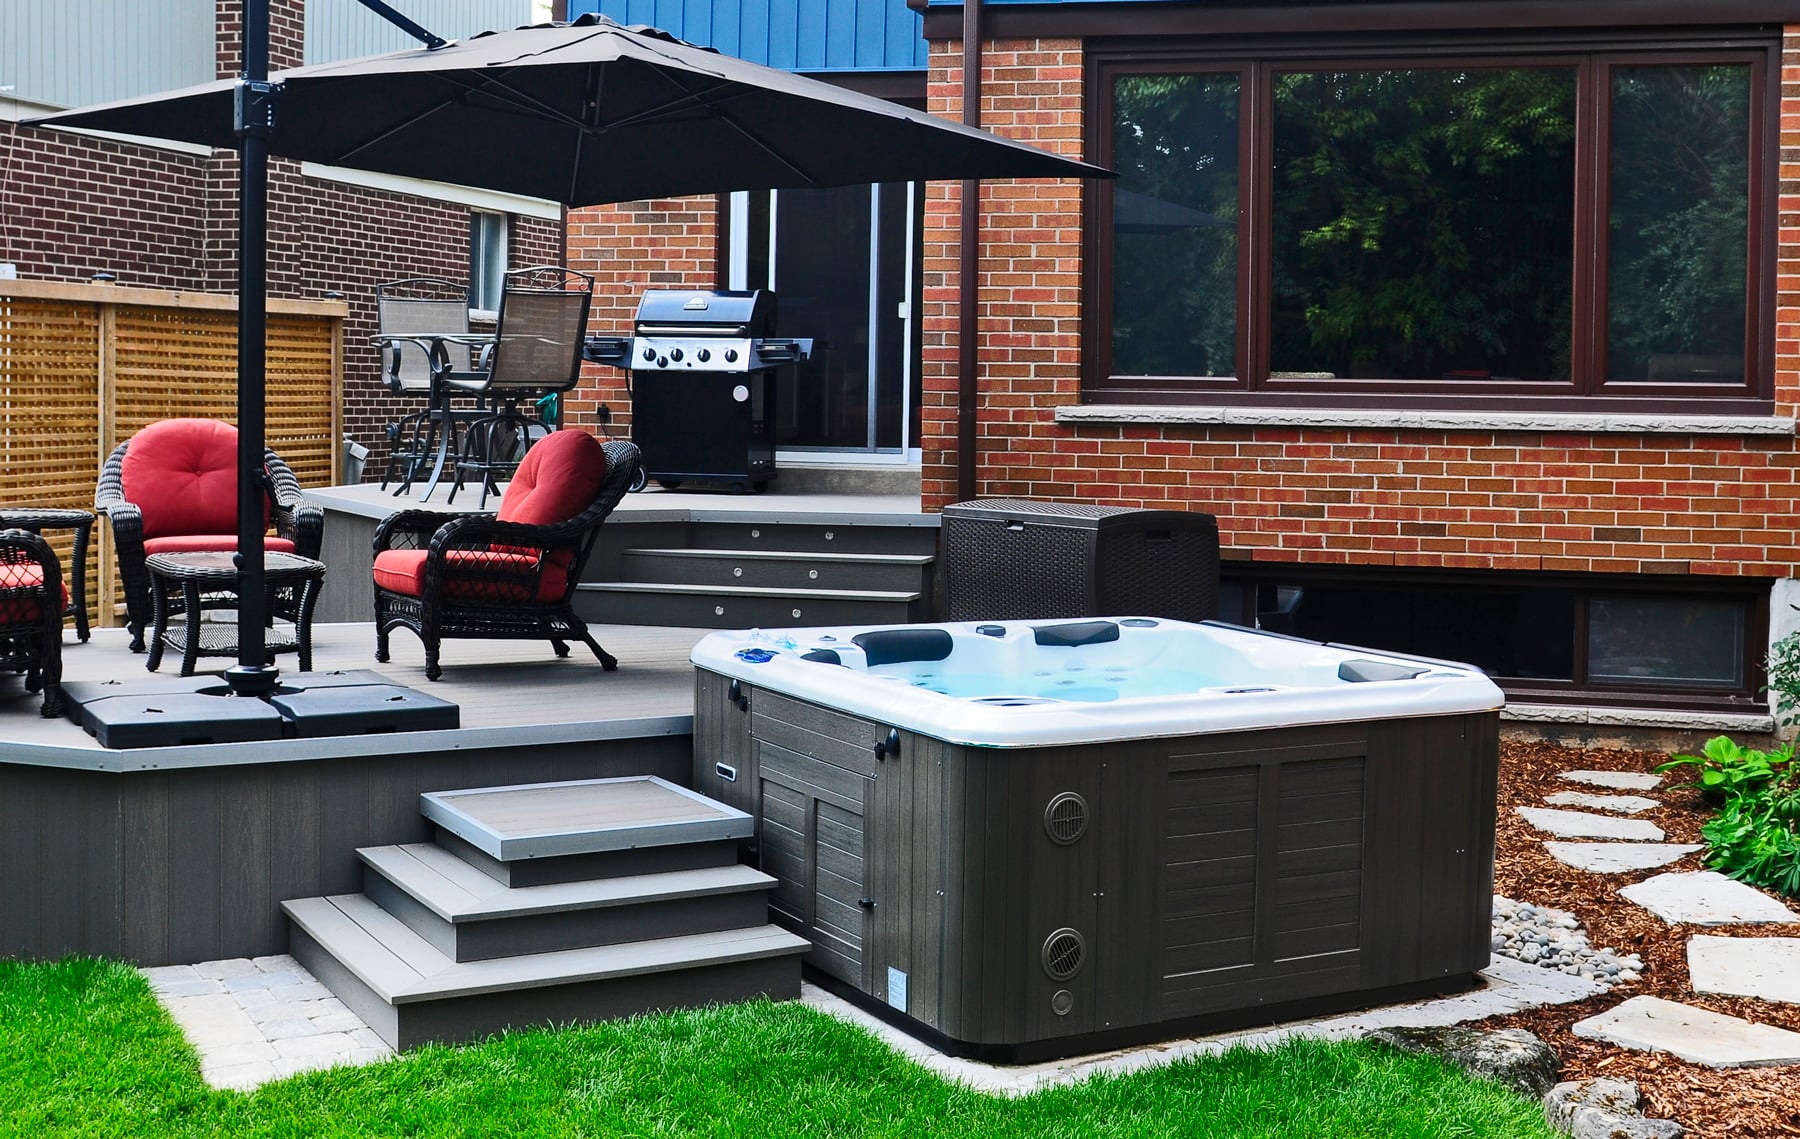 Spend Beautiful Time In Hot Tub With Your Complete Convenience!